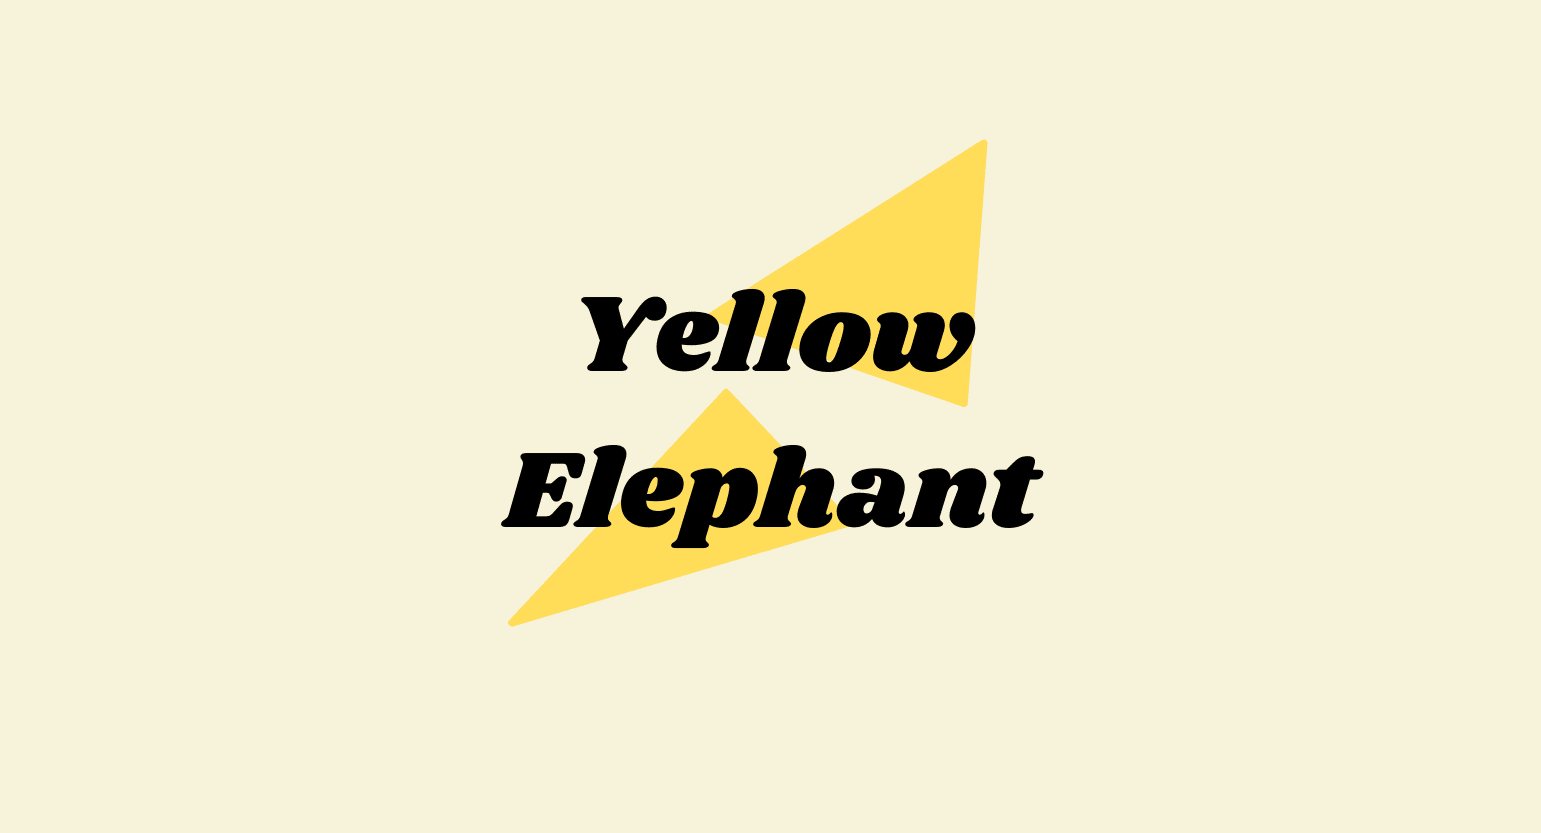 Yellow Elephant Kratom: Effects, Dosage, Safety & More